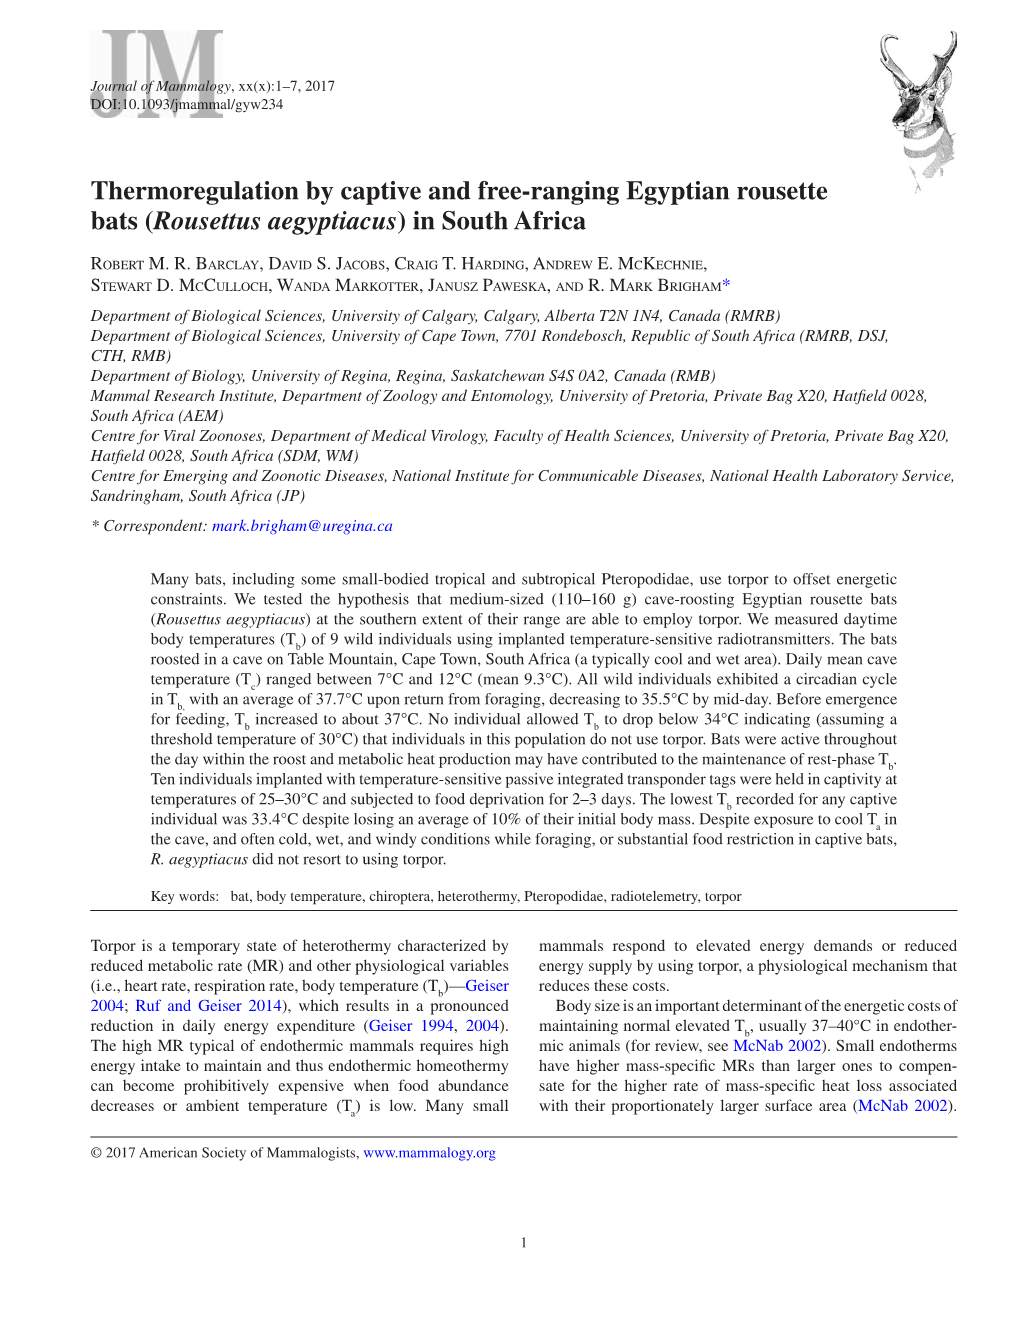 Thermoregulation by Captive and Free-Ranging Egyptian Rousette Bats (Rousettus Aegyptiacus) in South Africa